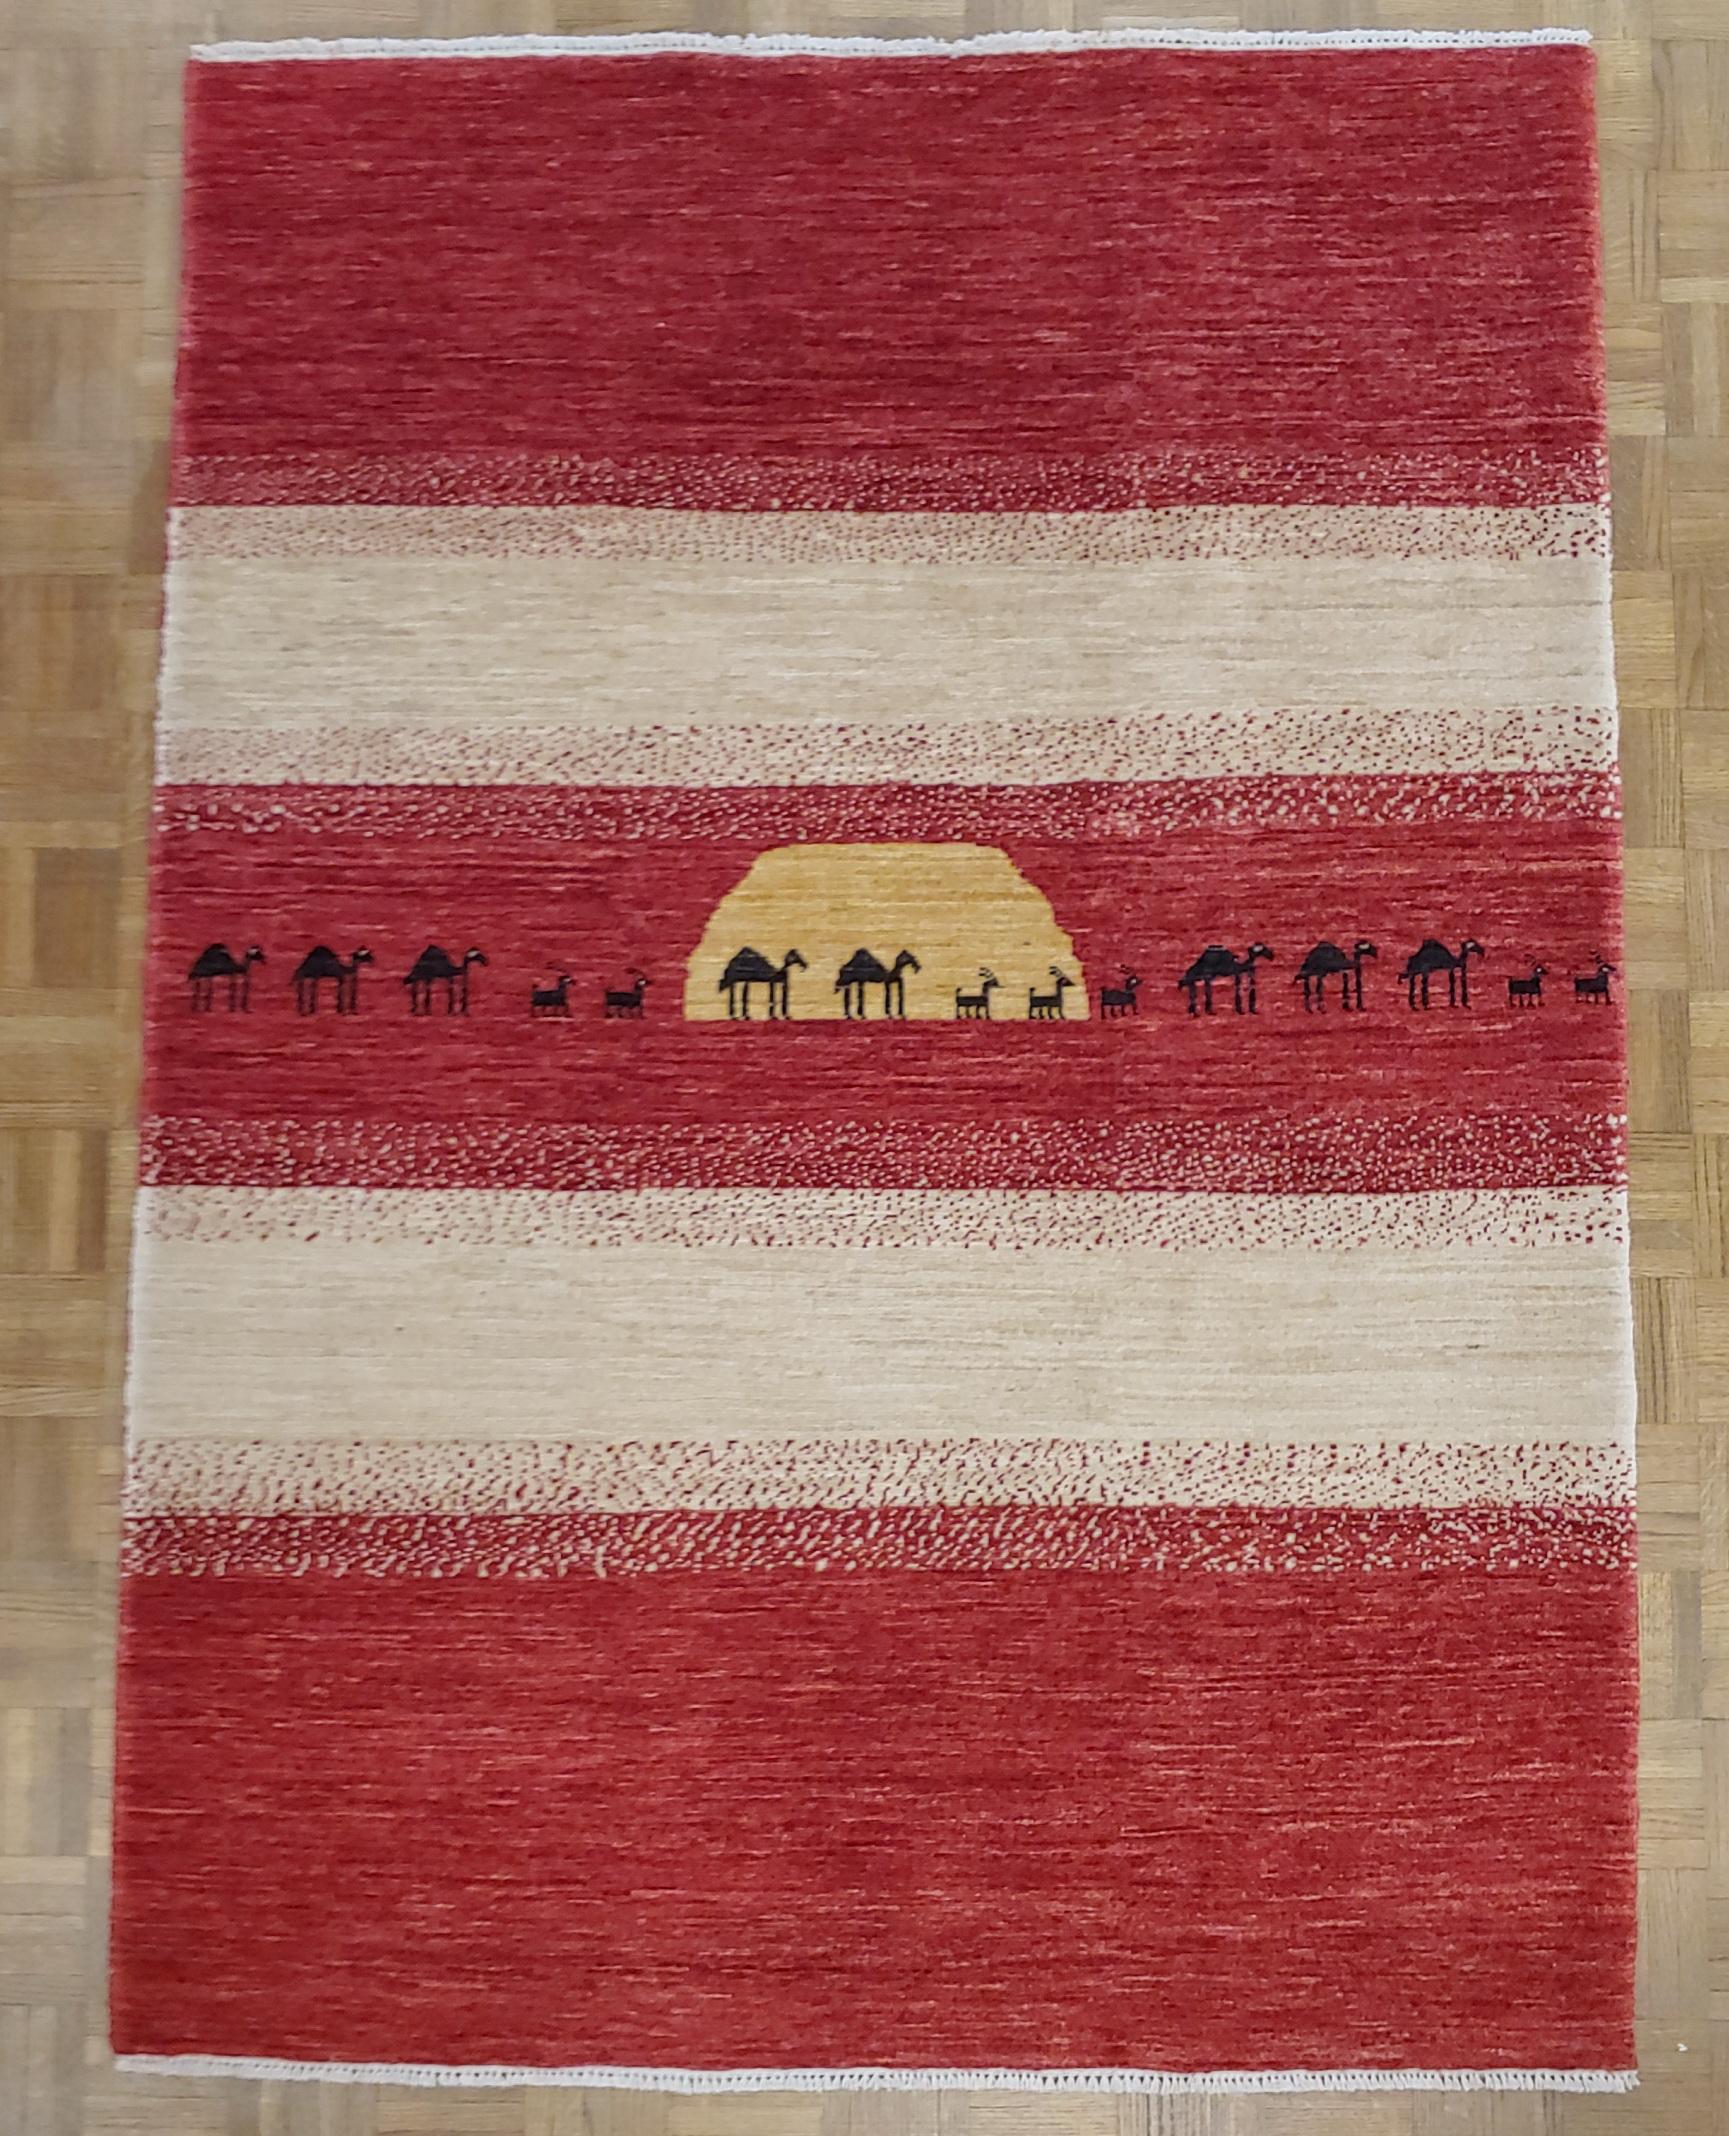 Woven New Rug From Afghanistan, Persian Gabbeh Design, Wool, Natural Dyes, 4-1x5-8  For Sale